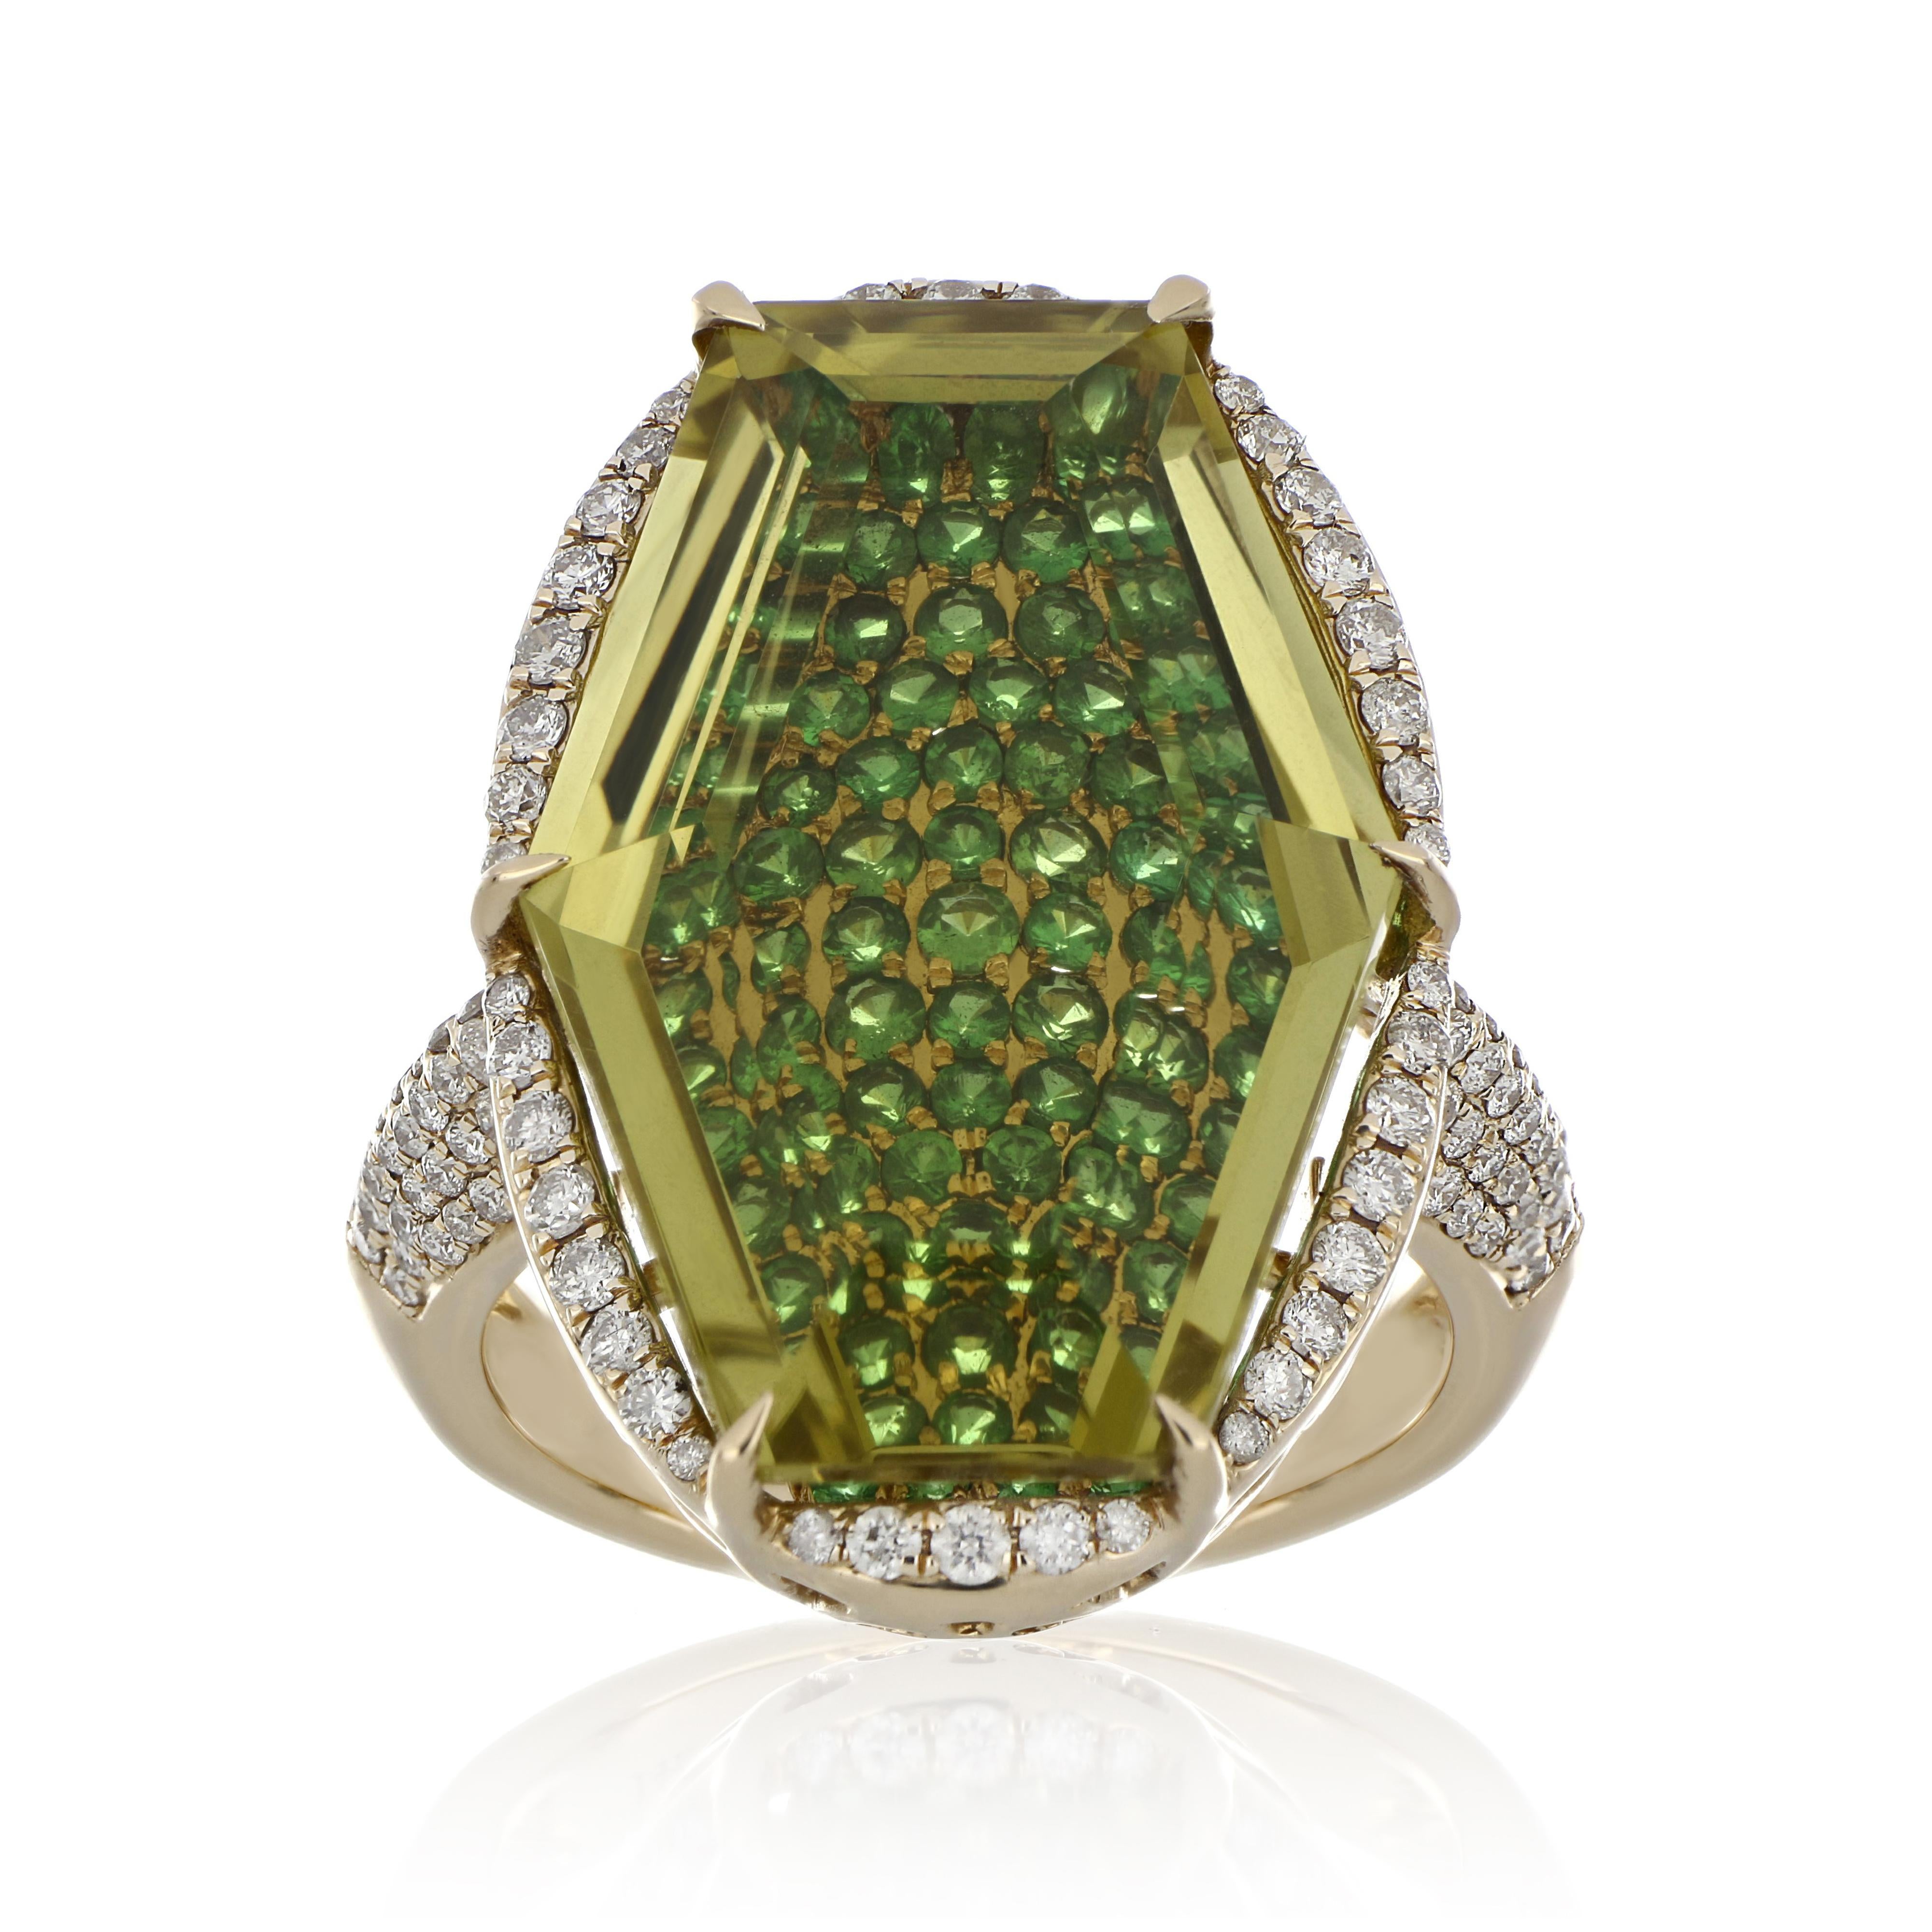 14 Karat Yellow Gold ring studded with fancy cut 23.9 x 15.8 mm 19.67 Ct Lemon Quartz,  with unique under stone setting of 1.44 Cts Tsavorite, accented with 0.73 Ct Diamond. Beautifully hand crafted in 14 Karat Yellow Gold.

Stone Details:
Lemon